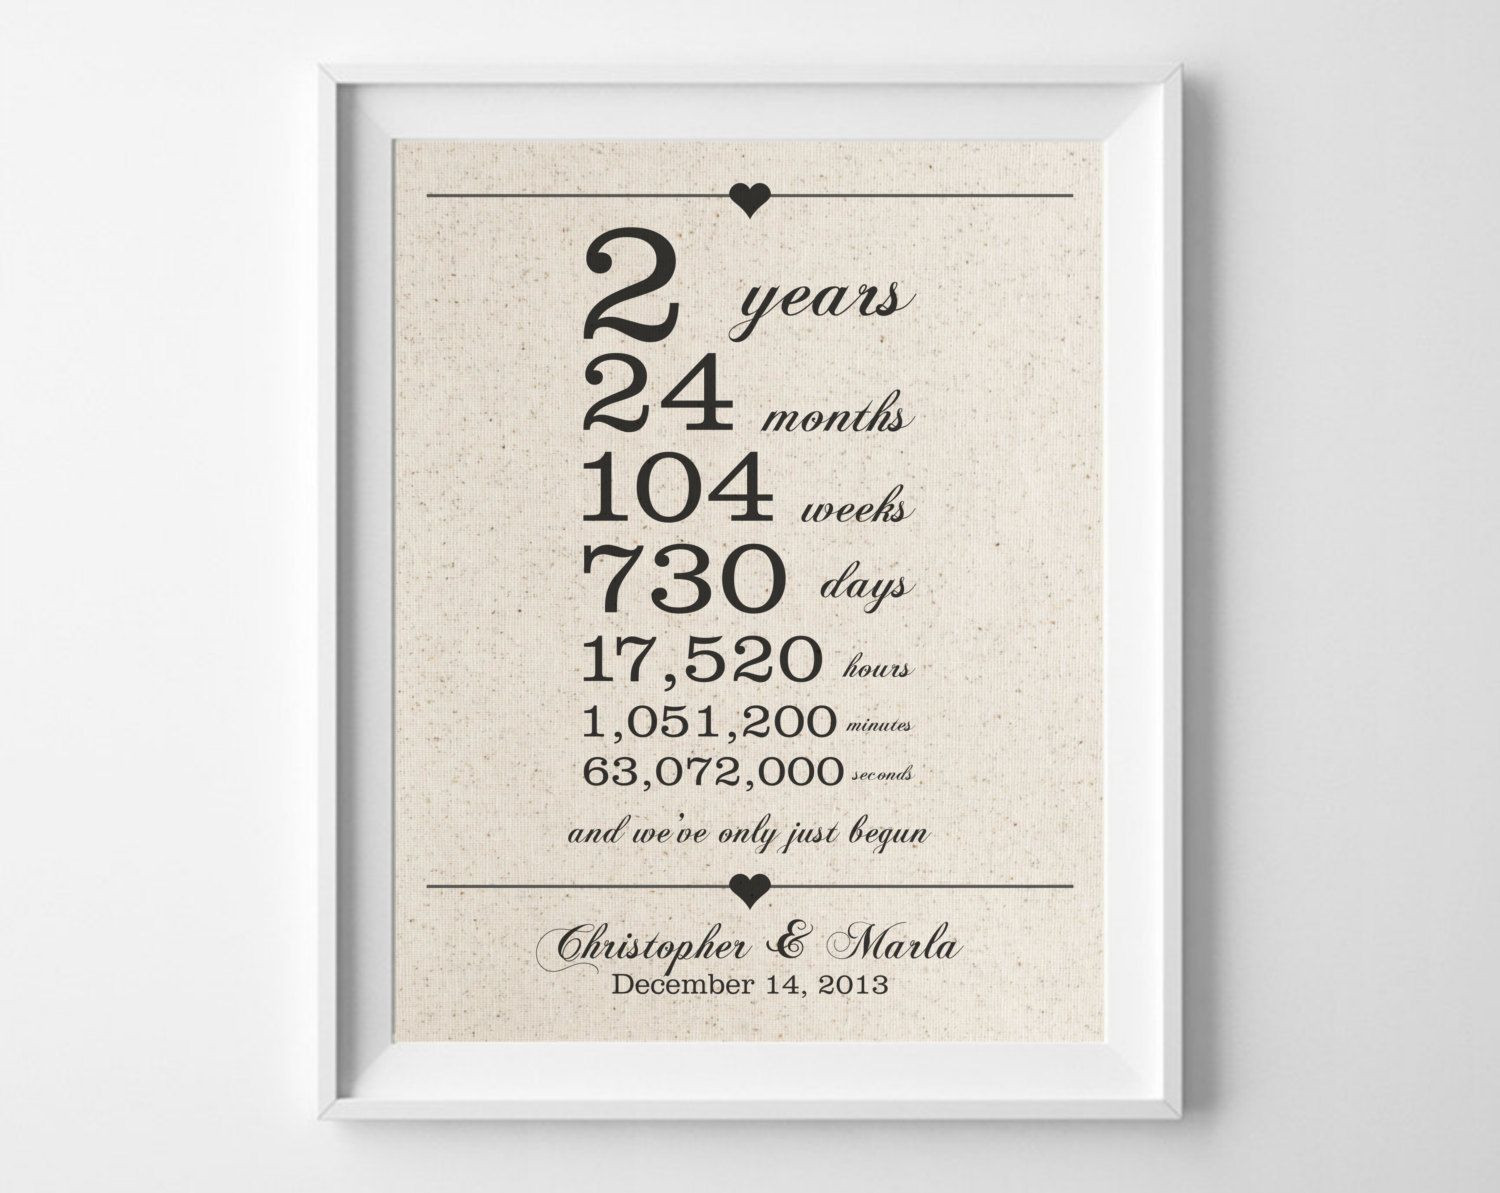 Second Anniversary Gift Ideas
 2 years to her Cotton Anniversary Print